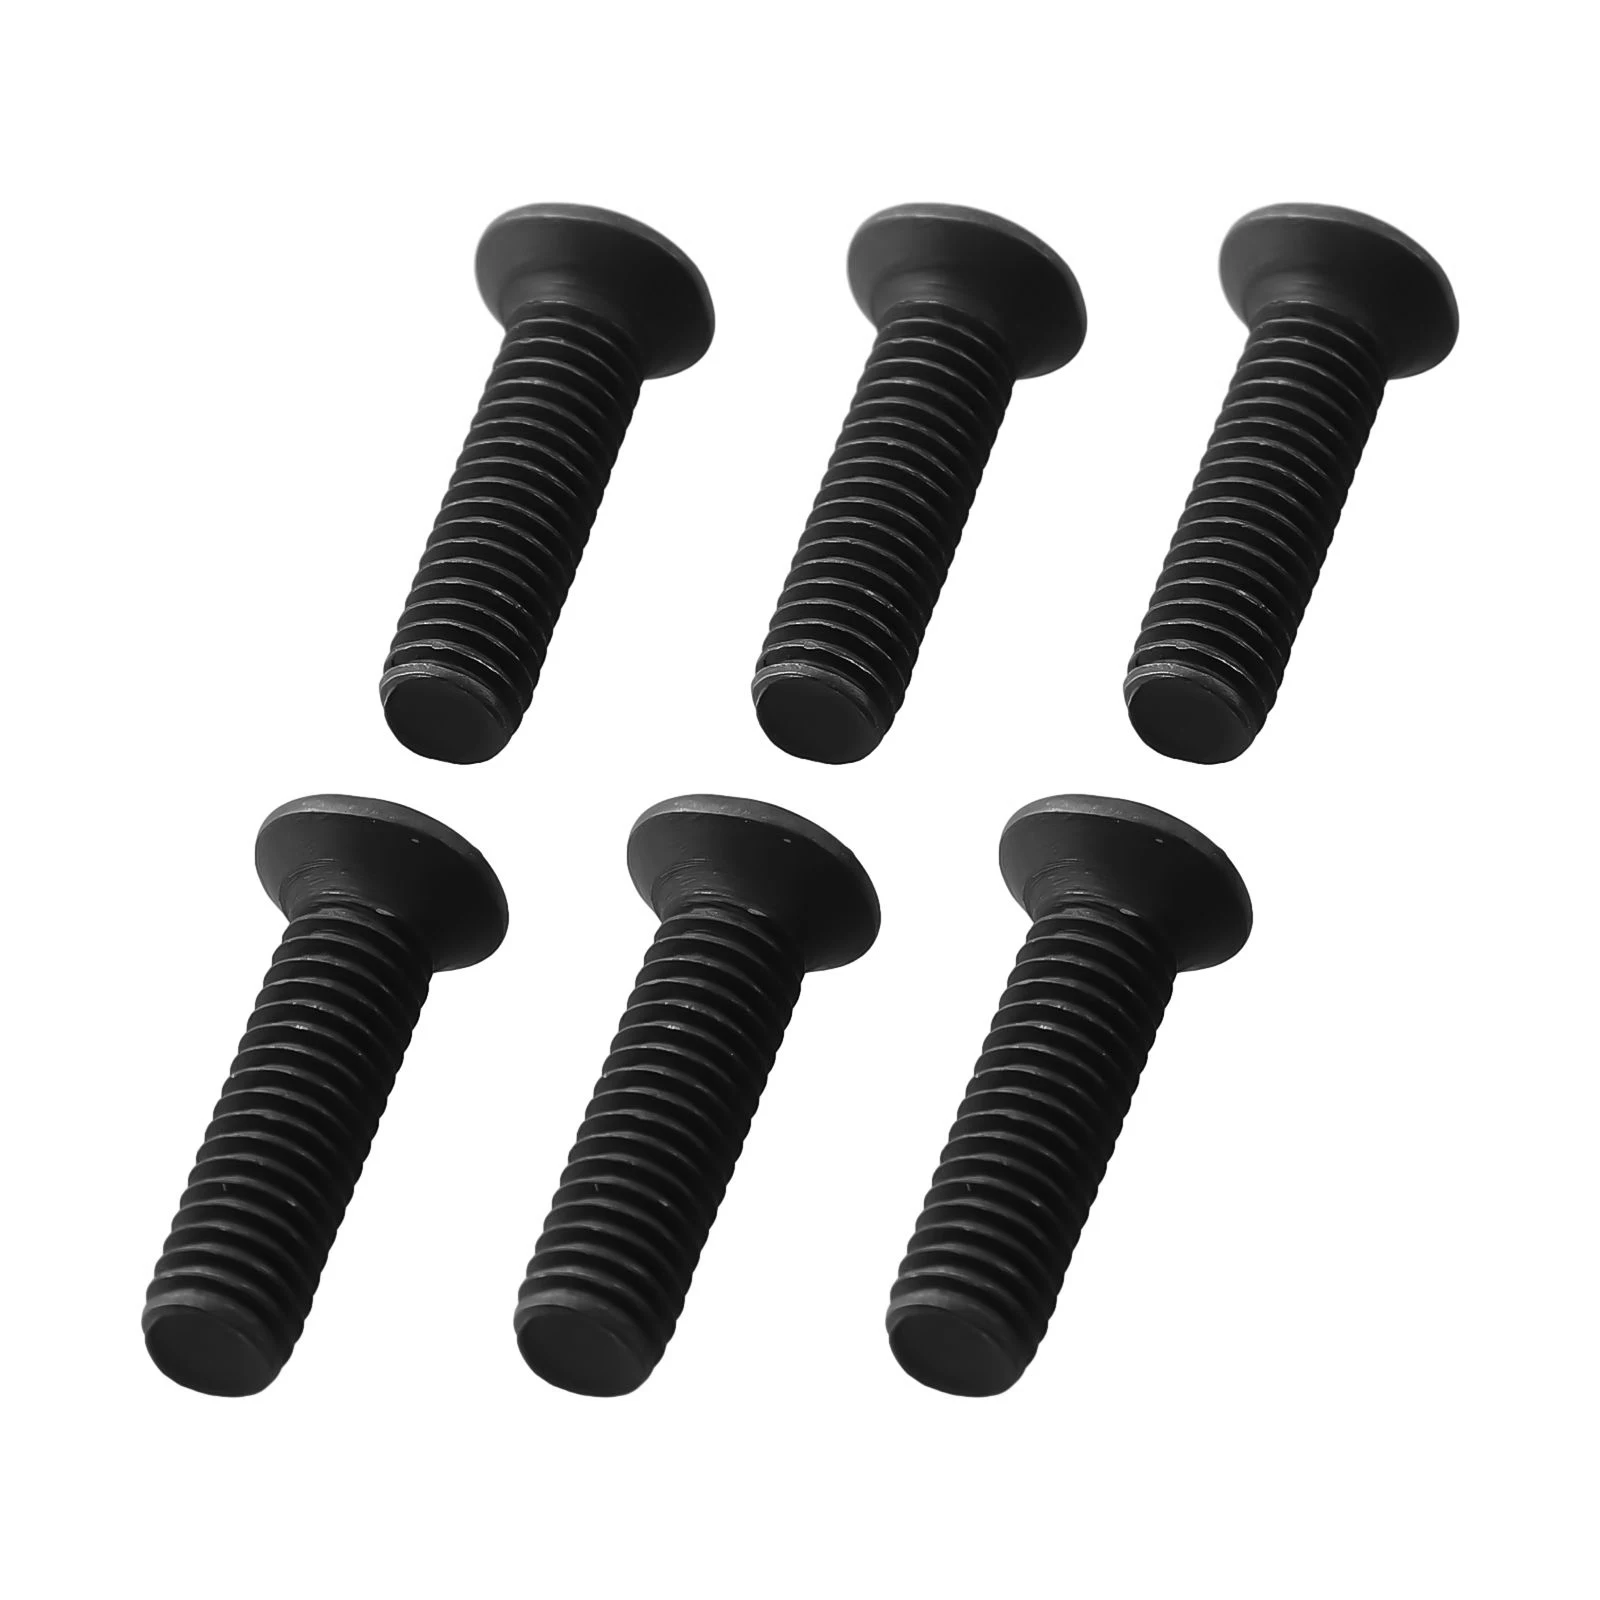 

6Pcs Fixing Screw M5*22mm/M6*22mm Left Hand Thread Metal Screw For UNF Drill Chuck Shank Adapter Hand Tool Accessories